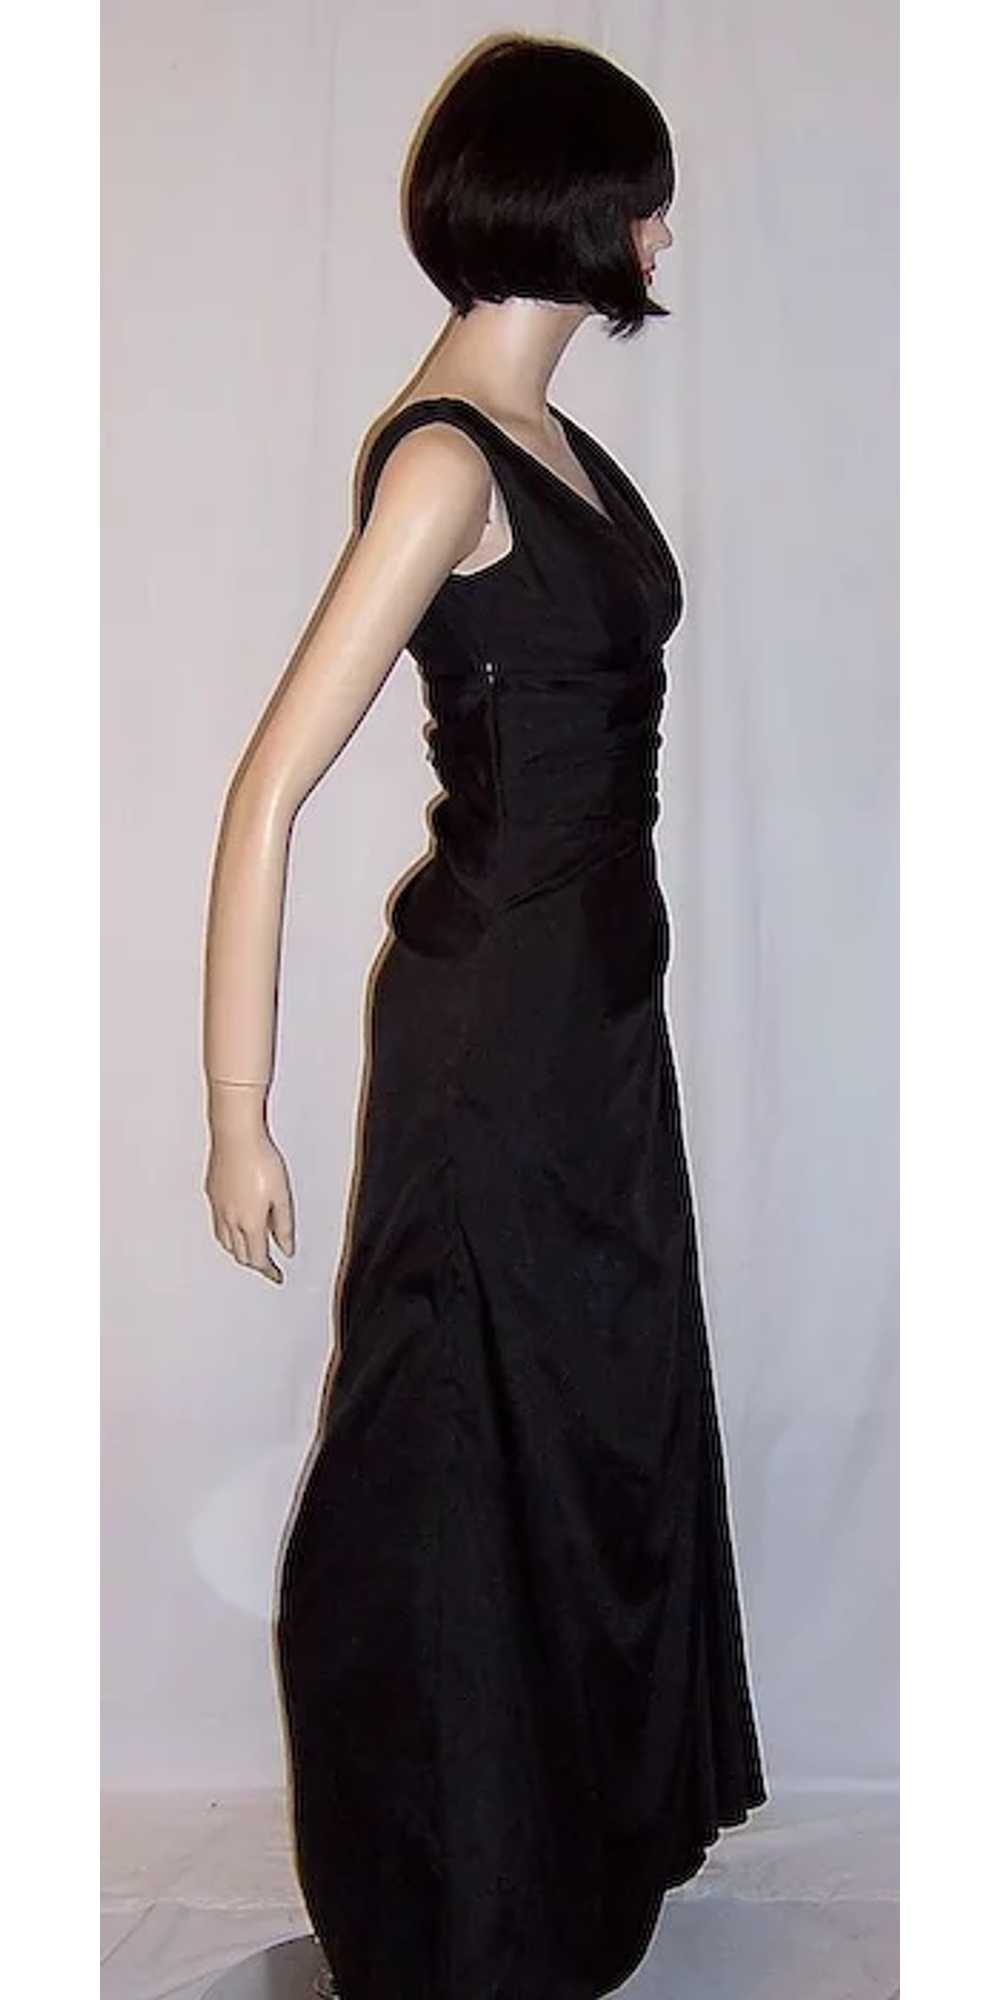 Black Sleeveless Floor Length Gown with Ruching - image 4